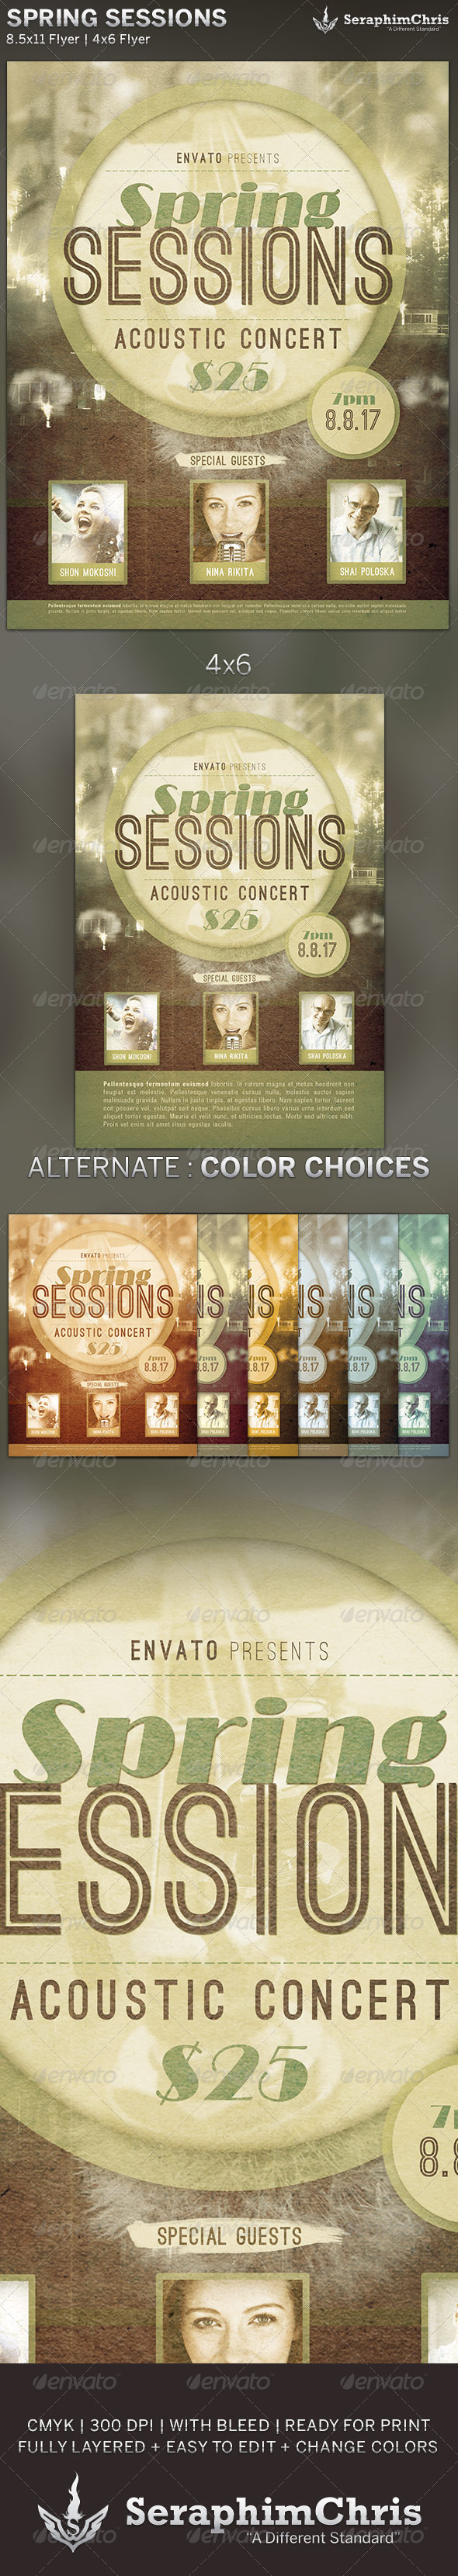 Spring Sessions: Concert Flyer Template